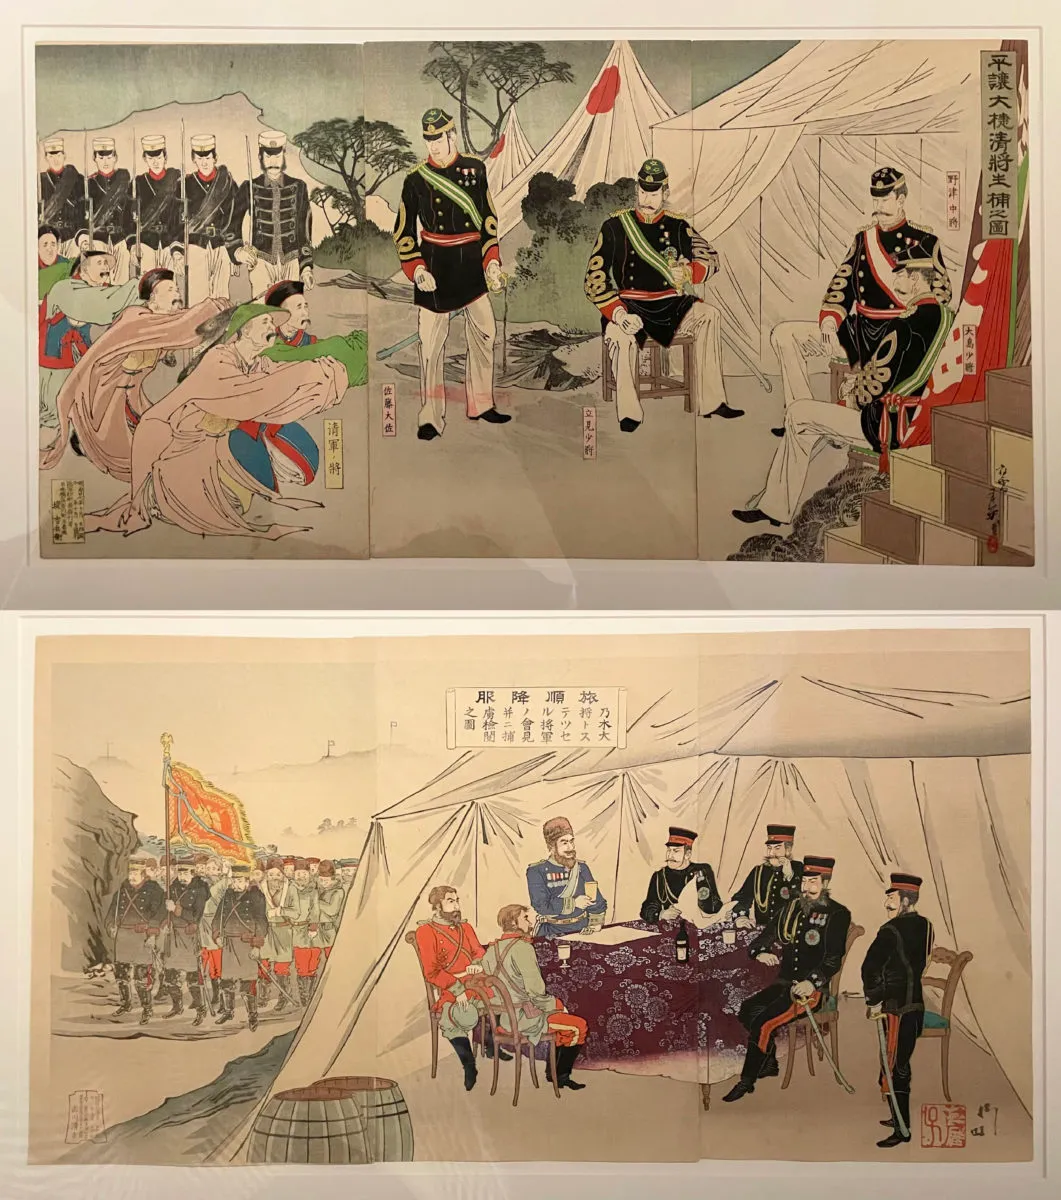 Top image has the captured chinese generals pleading on the ground in front of the camp where the japanese generals, dressed in long-sleeved black tops, white pants, landyard and caps. Towards the left a line of soldiers holding guns upwards also loom ominously.

The lower image sees the captured white generals sitting on the chairs discussing with the japanese generals inside the camp, sheltered and well seateed. Rows and rows of prisoners of war are towards the left outside the tent where the generals are. The prisoners of war march behind the japanese solder holding up a flag of victory.